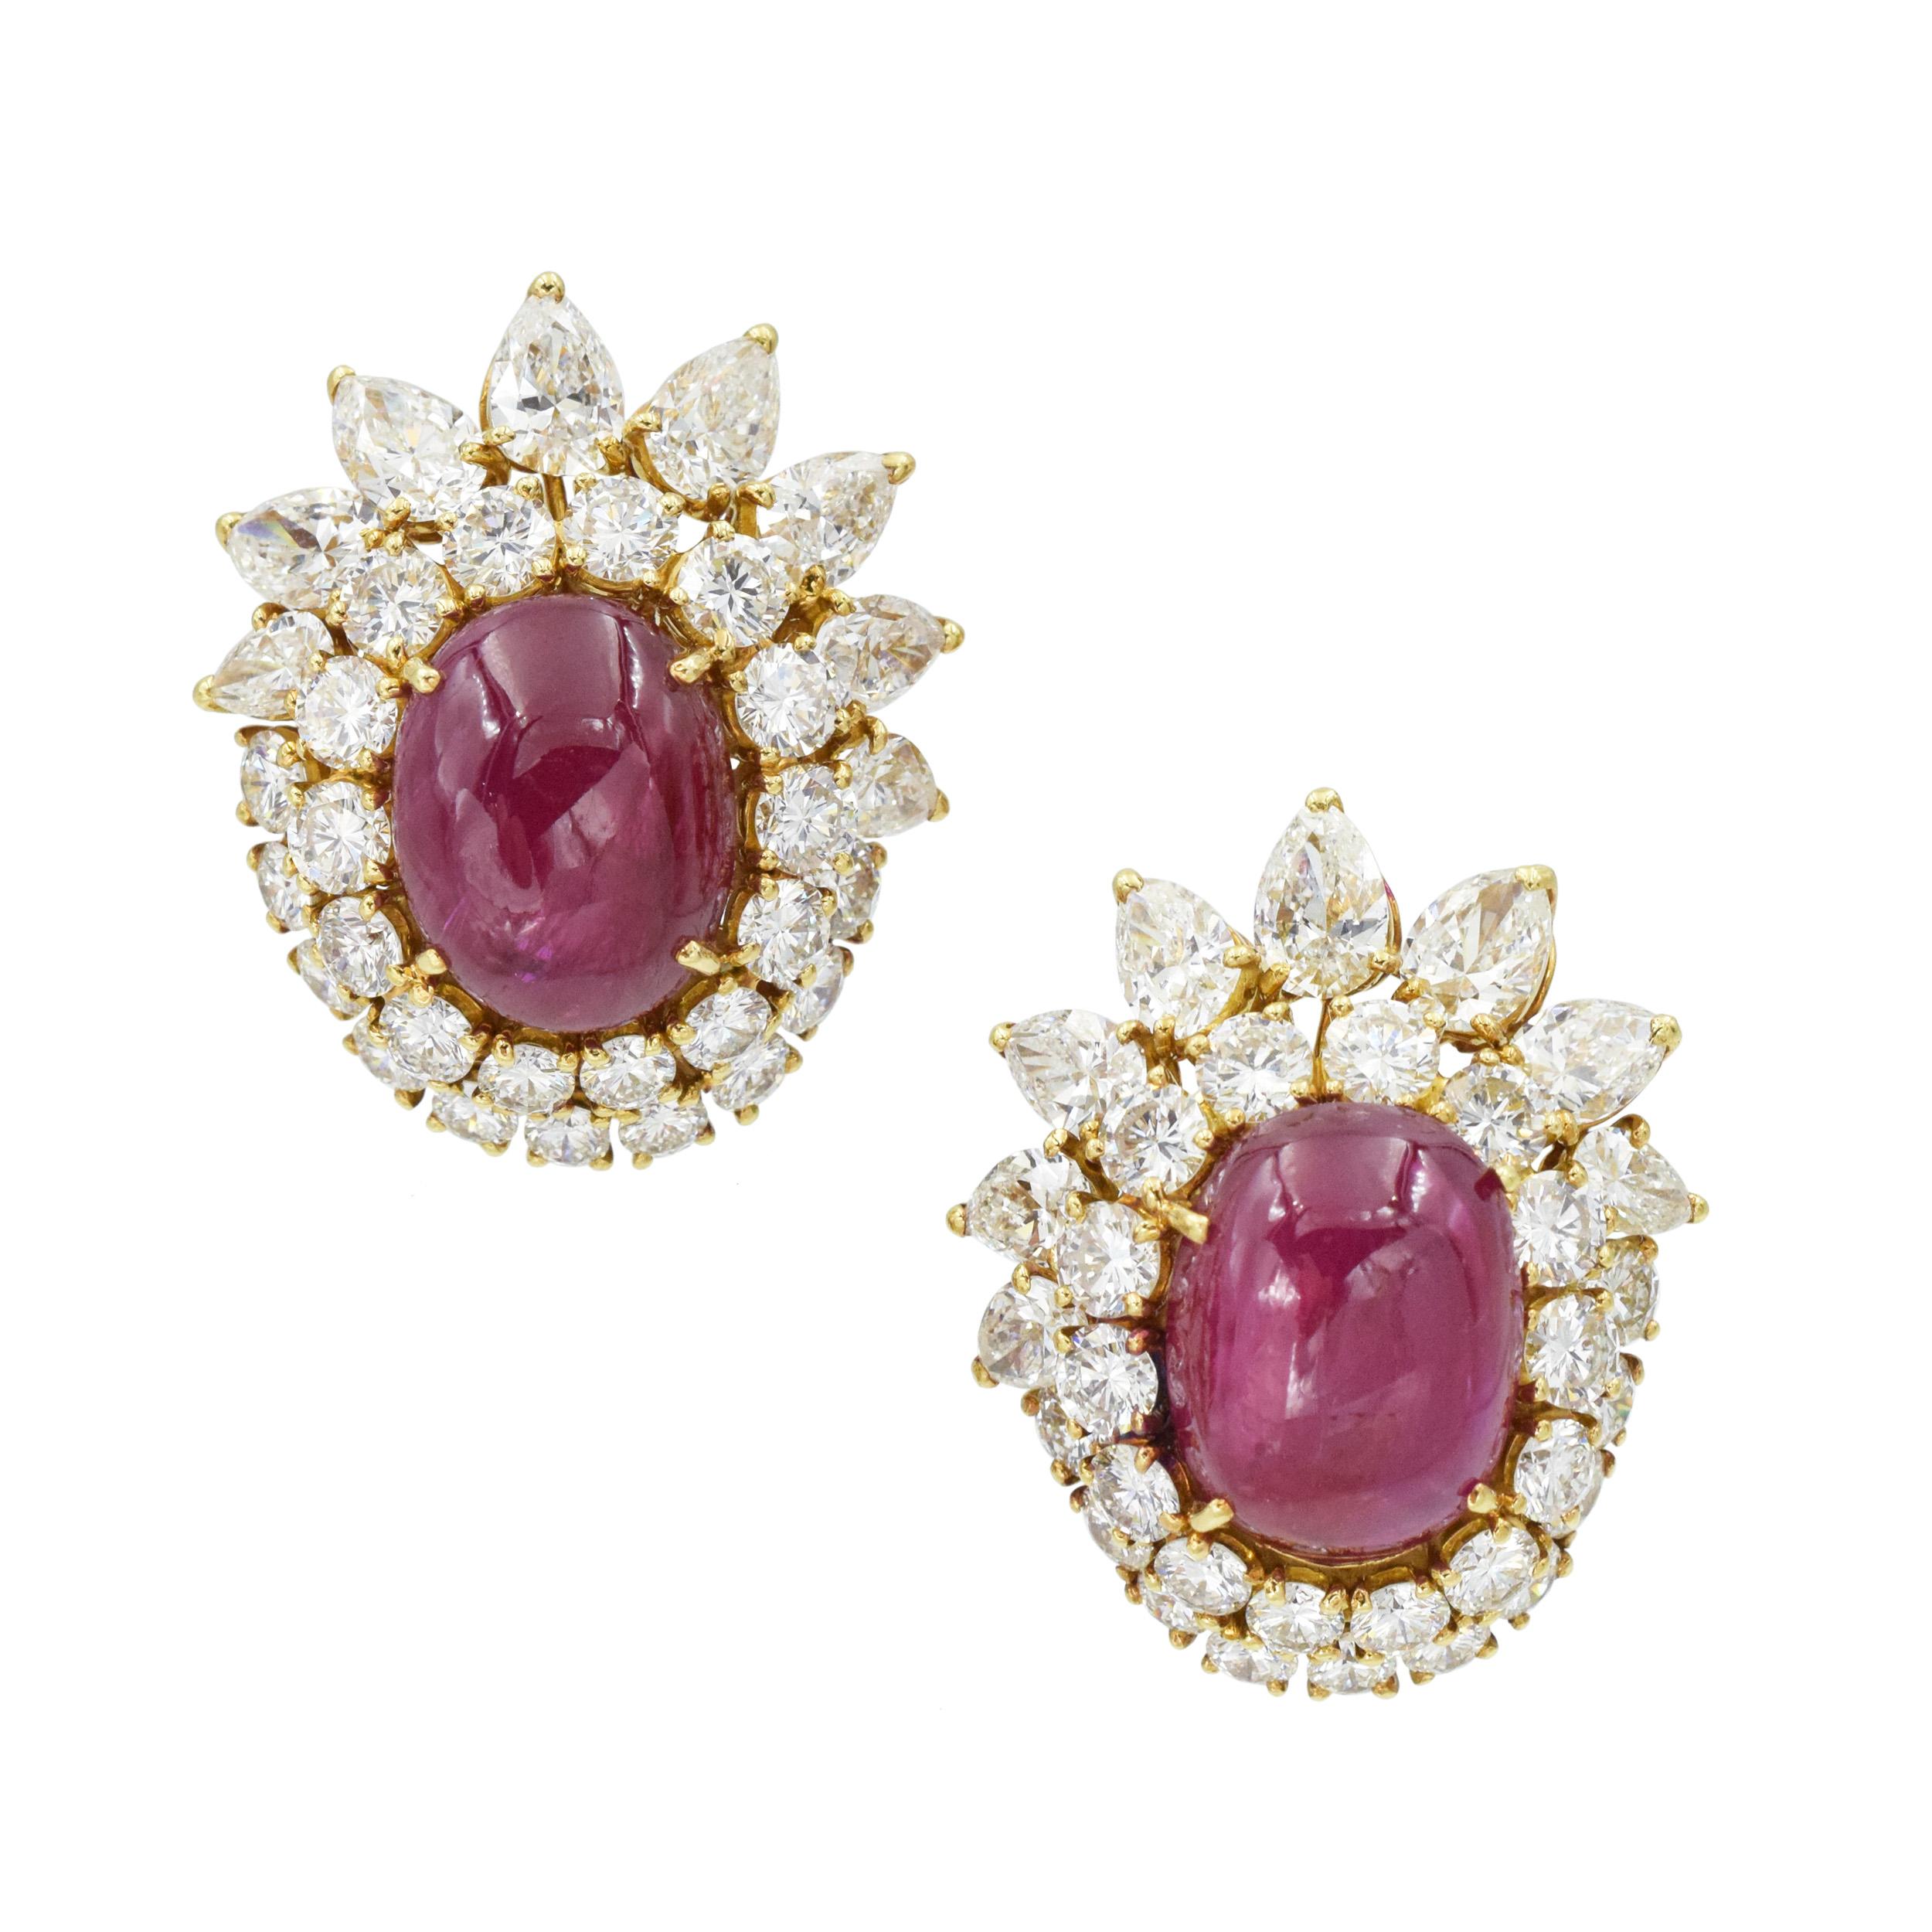 Vintage, Van Cleef And Arpels Ruby & Diamond Earrings and Ring Set In 18k Yellow Gold. Circa 1975.
  the earrings are set with 2 oval cabochon cut rubies measuring 13.8 x 10.8 x 6.0 mm and 14.3 x 10.9 x 5.5 mm, surrounded with double halo 48 round